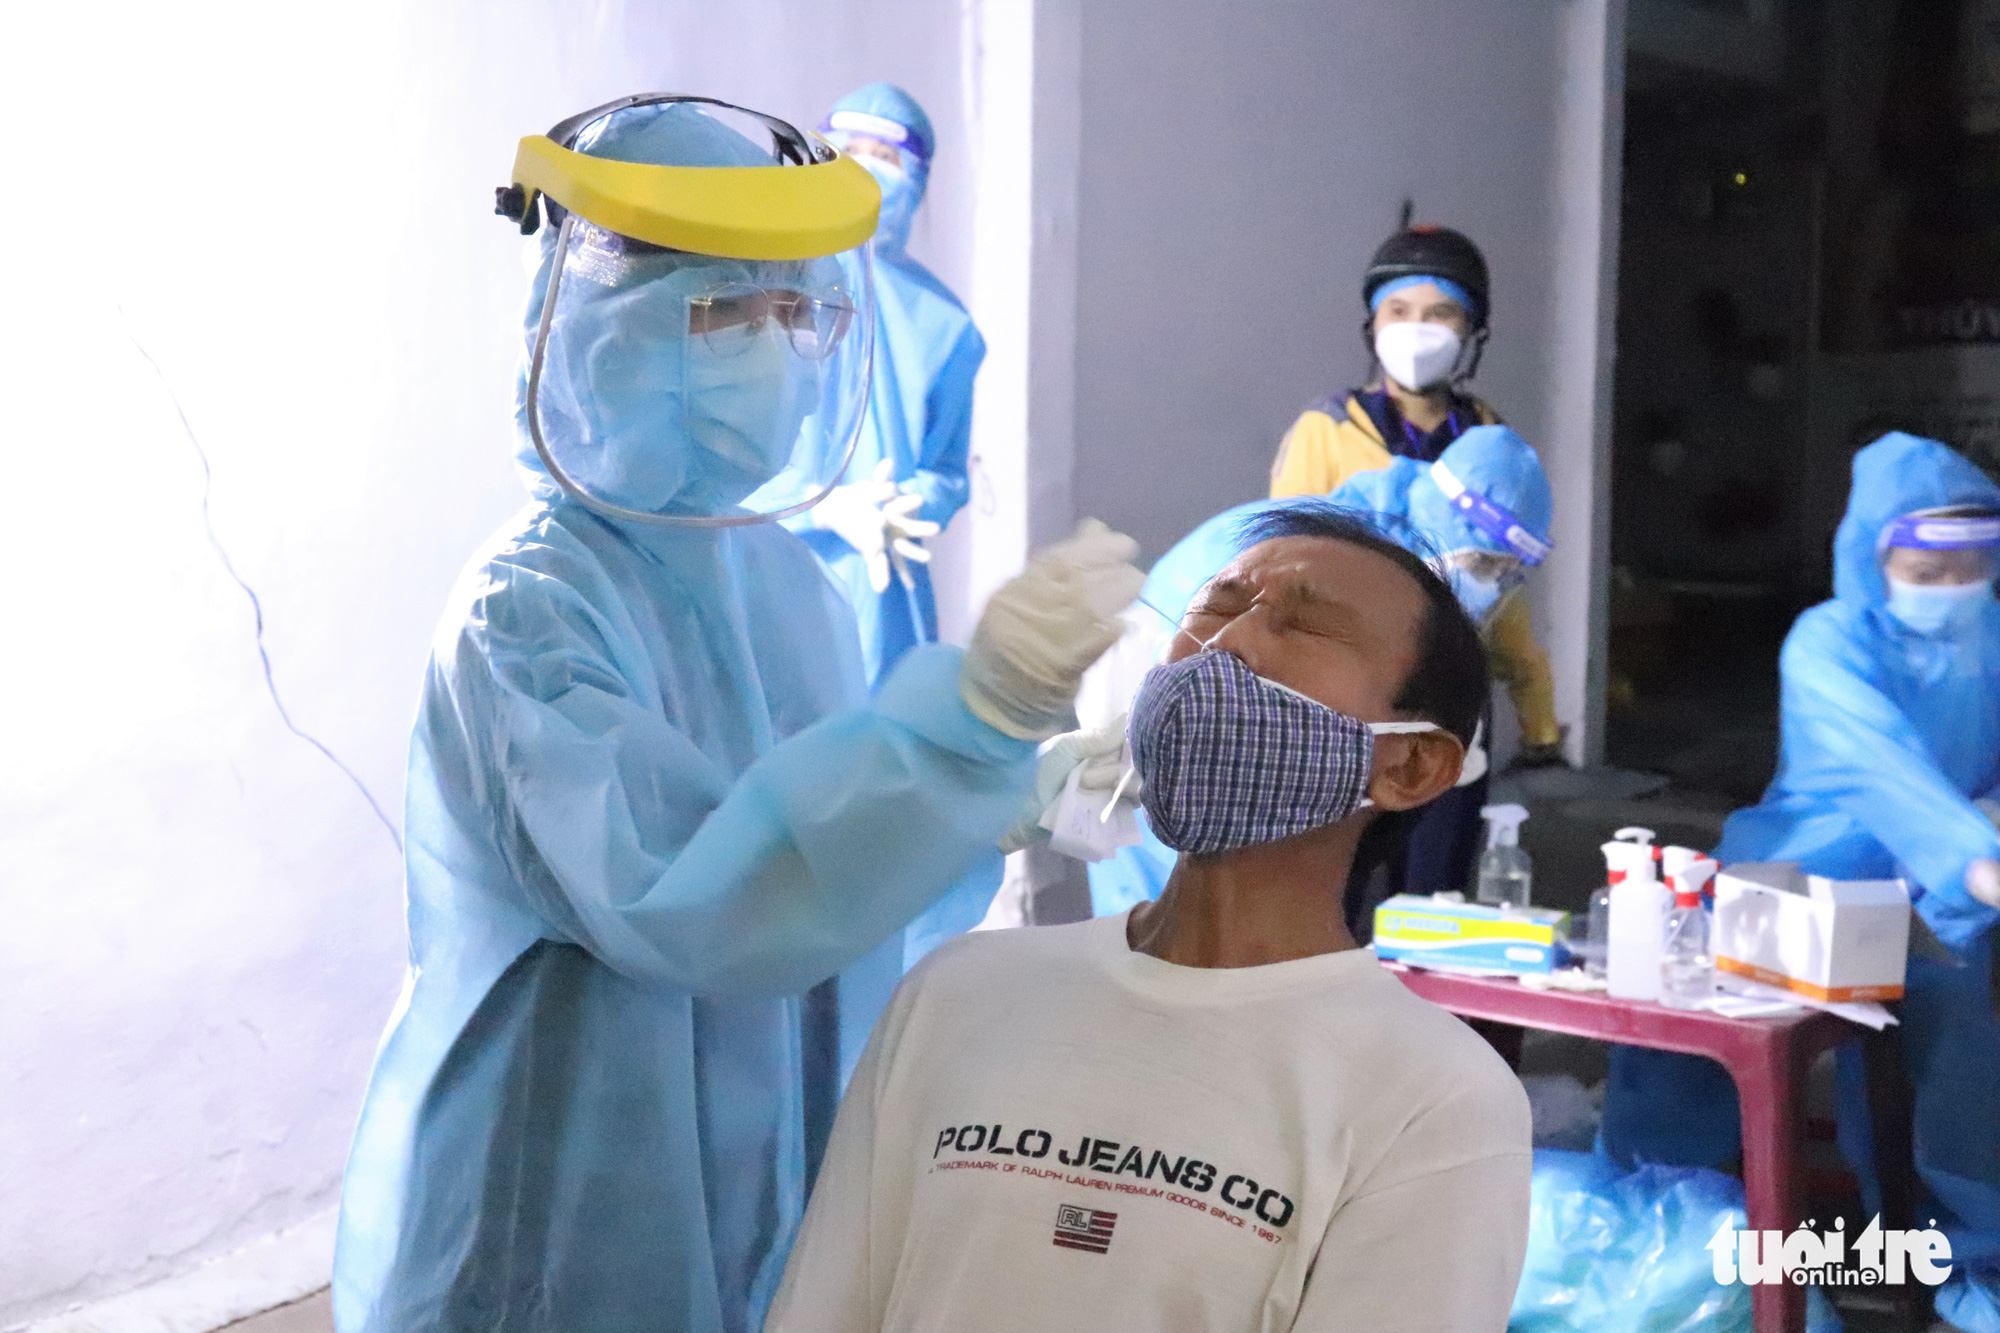 Community-based infection rate remains high in Ho Chi Minh City